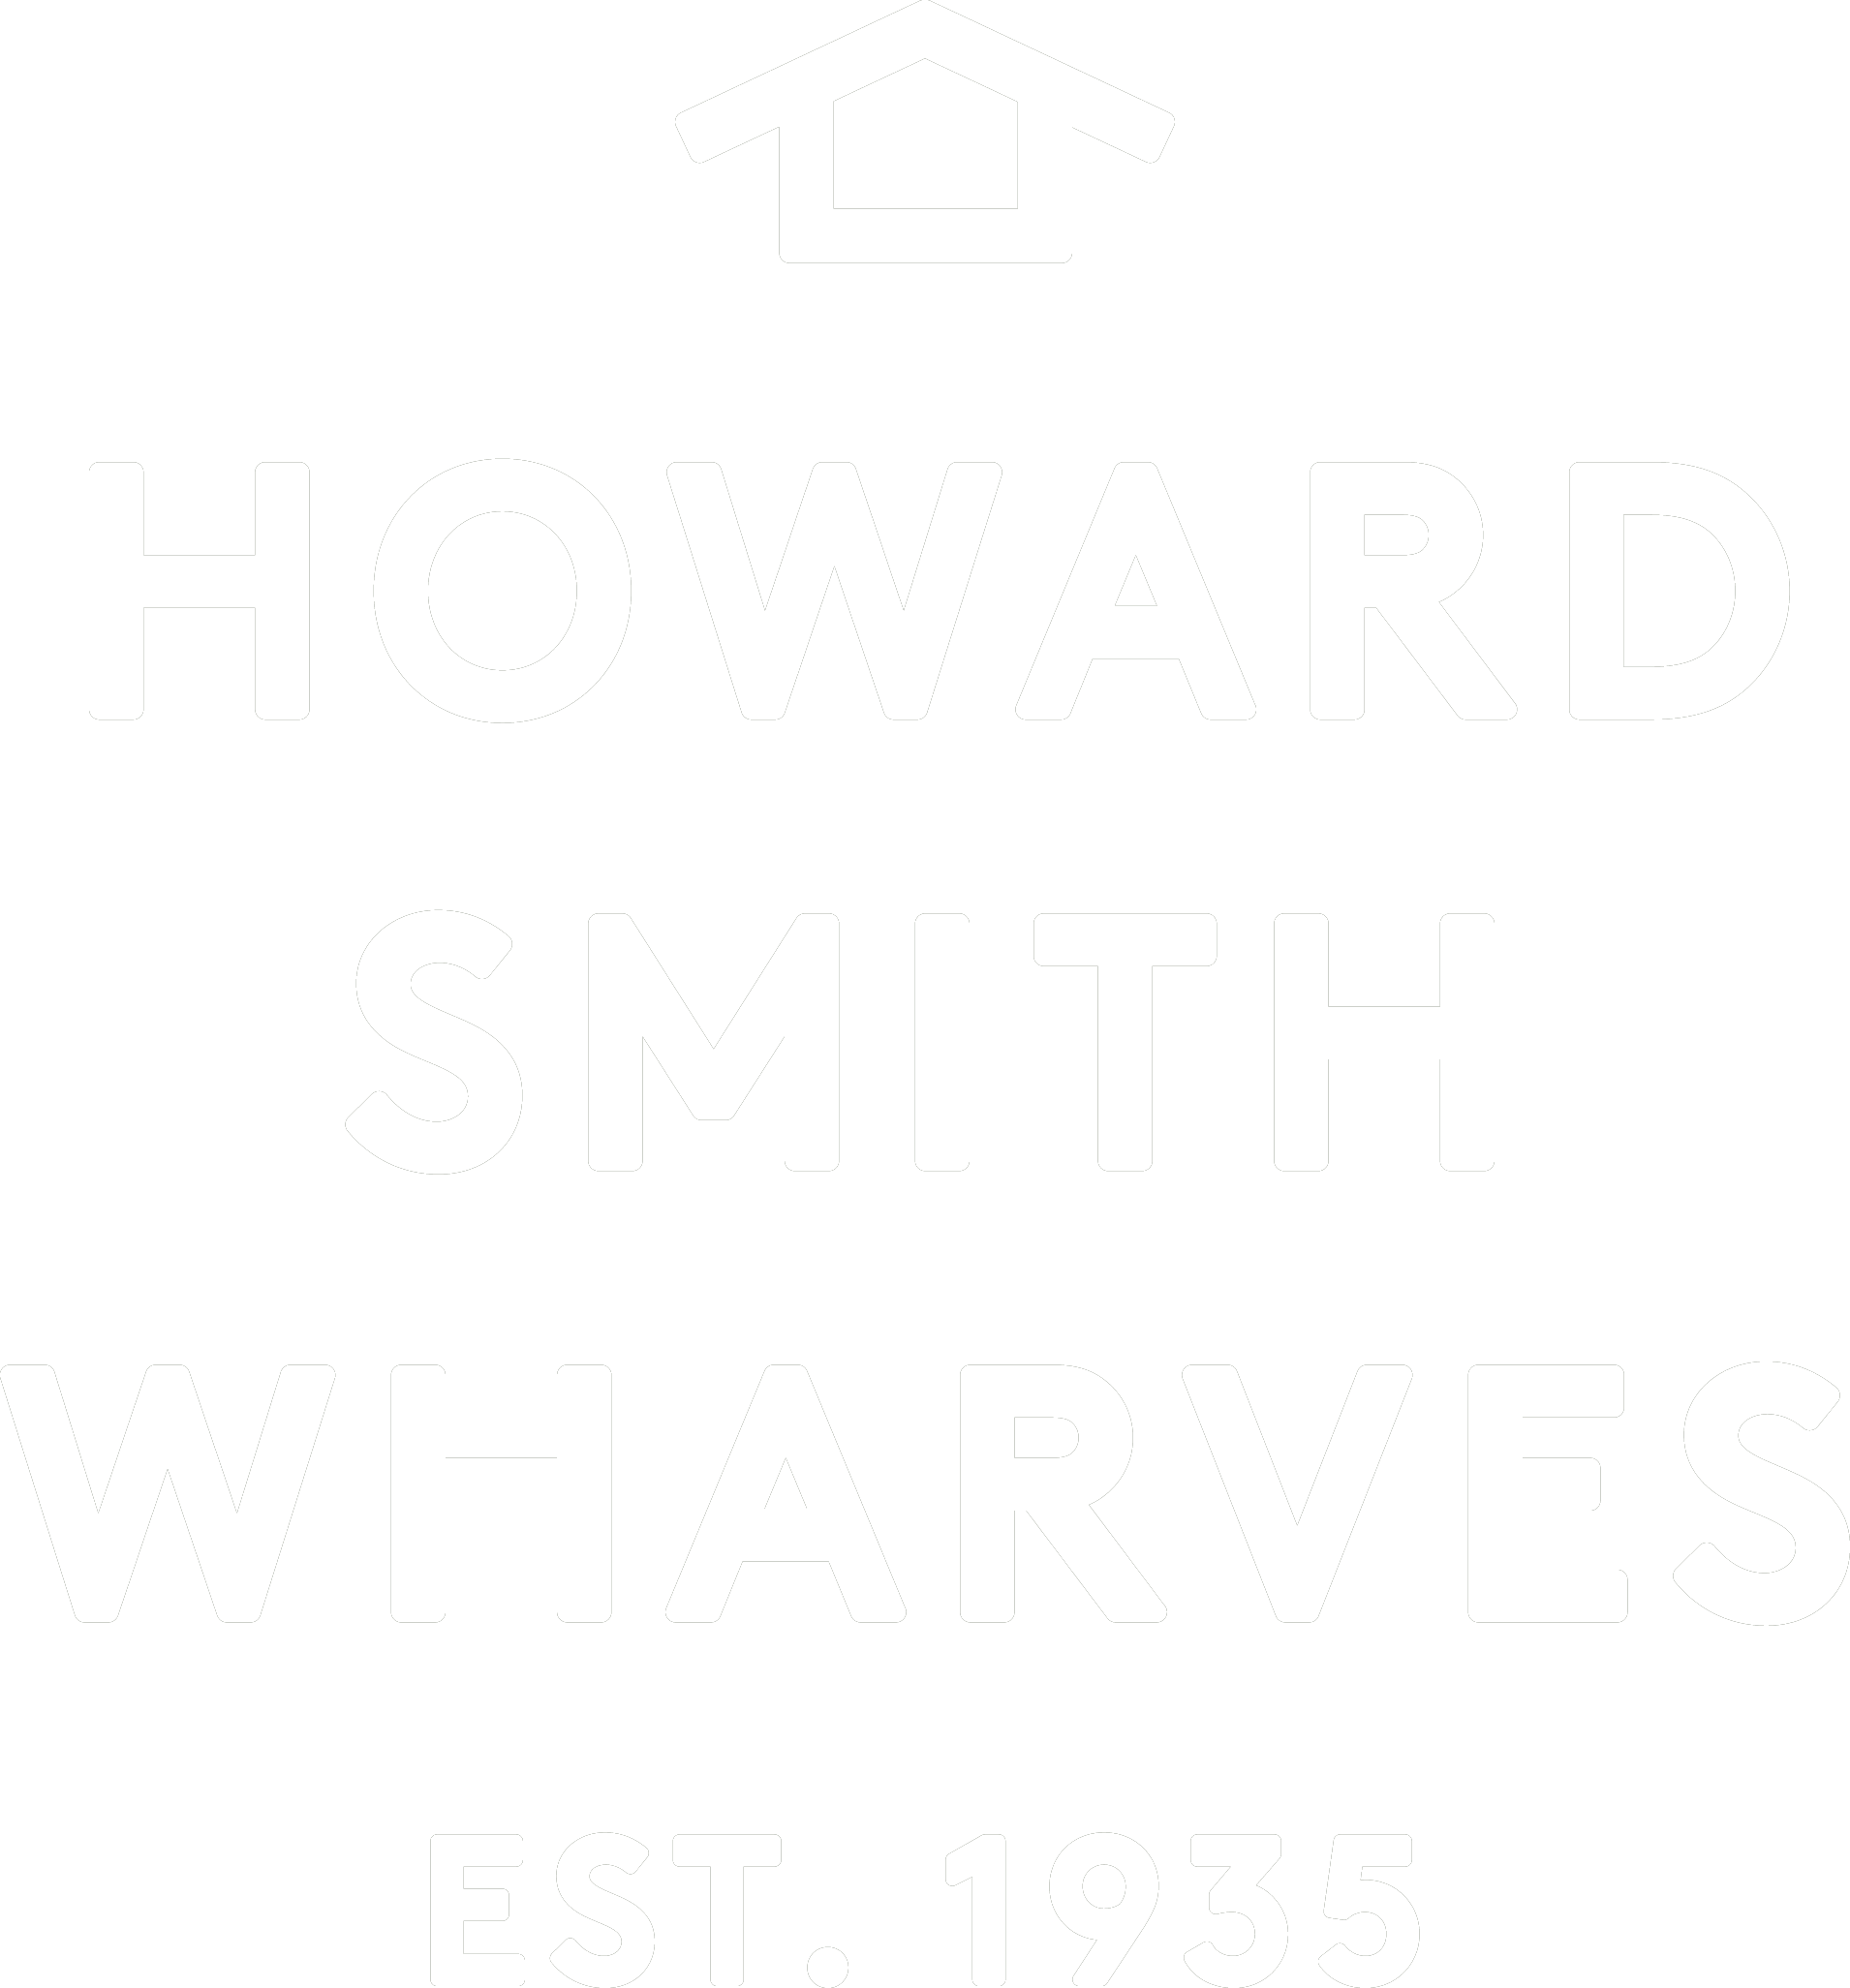 WHITEHSW Logotype Stacked